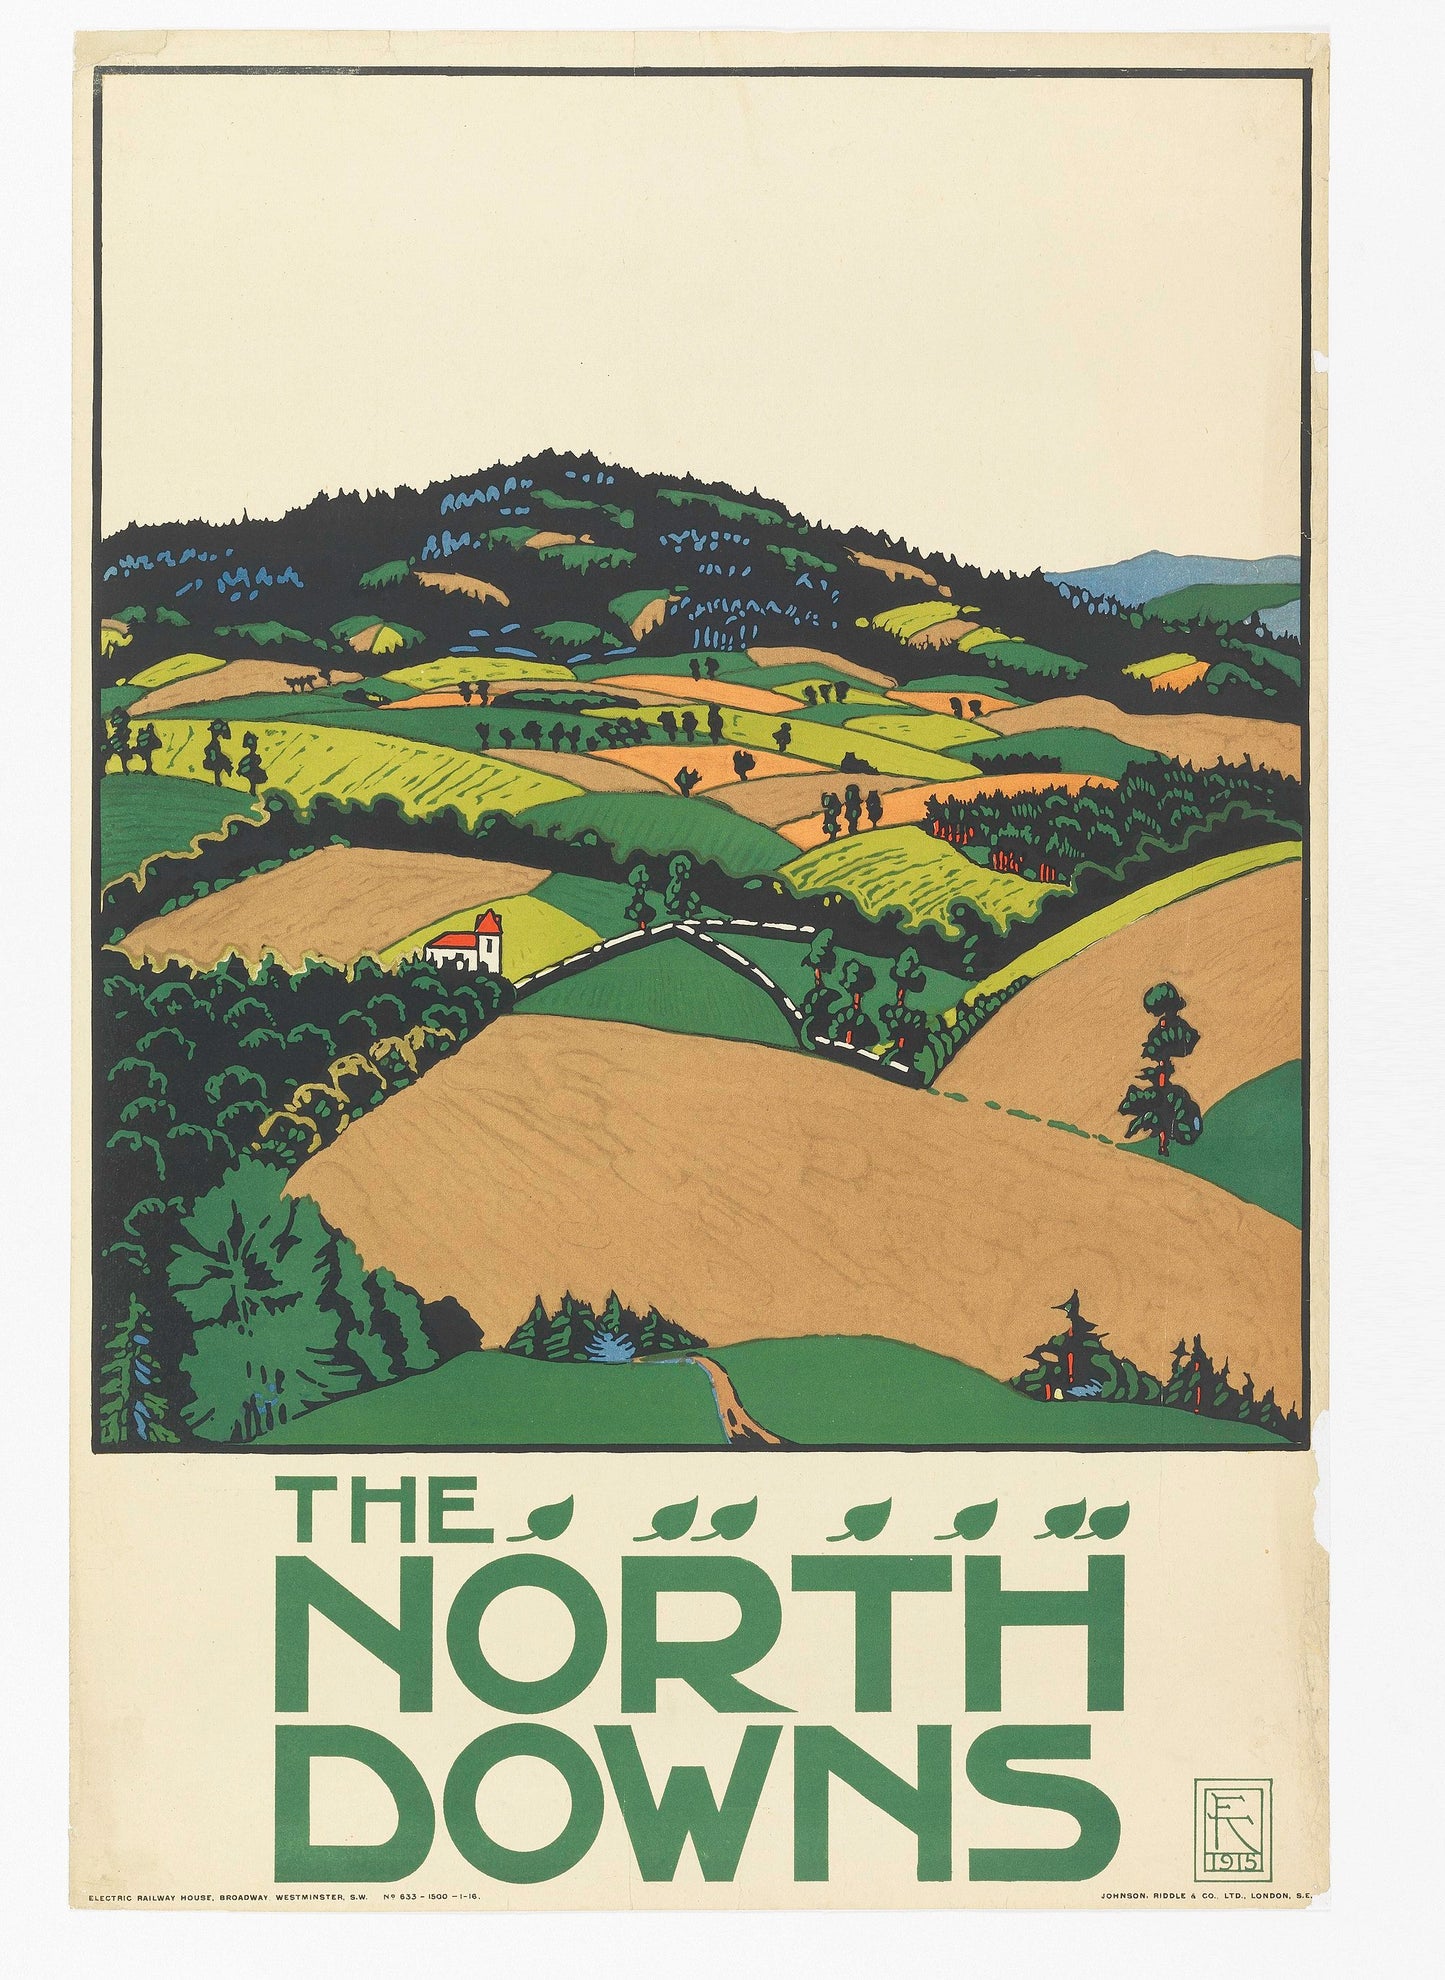 The North Downs (1900s) | Vintage underground posters | Edward McKnight Kauffer Posters, Prints, & Visual Artwork The Trumpet Shop   